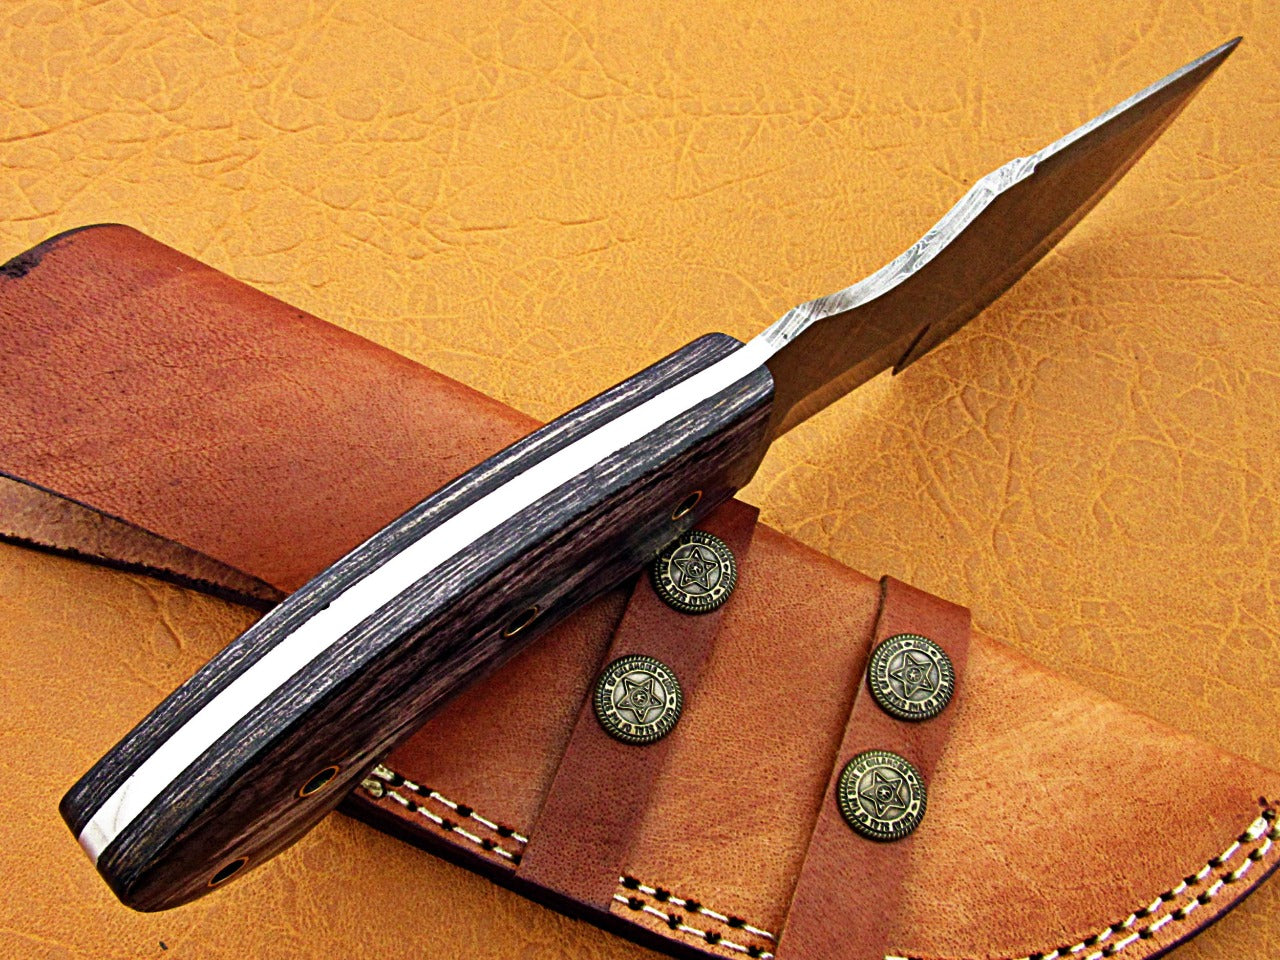 10" Long hand forged twist pattern full tang hand forged Damascus steel tracker knife, dollar wood with holes scale, Cow hide leather sheath